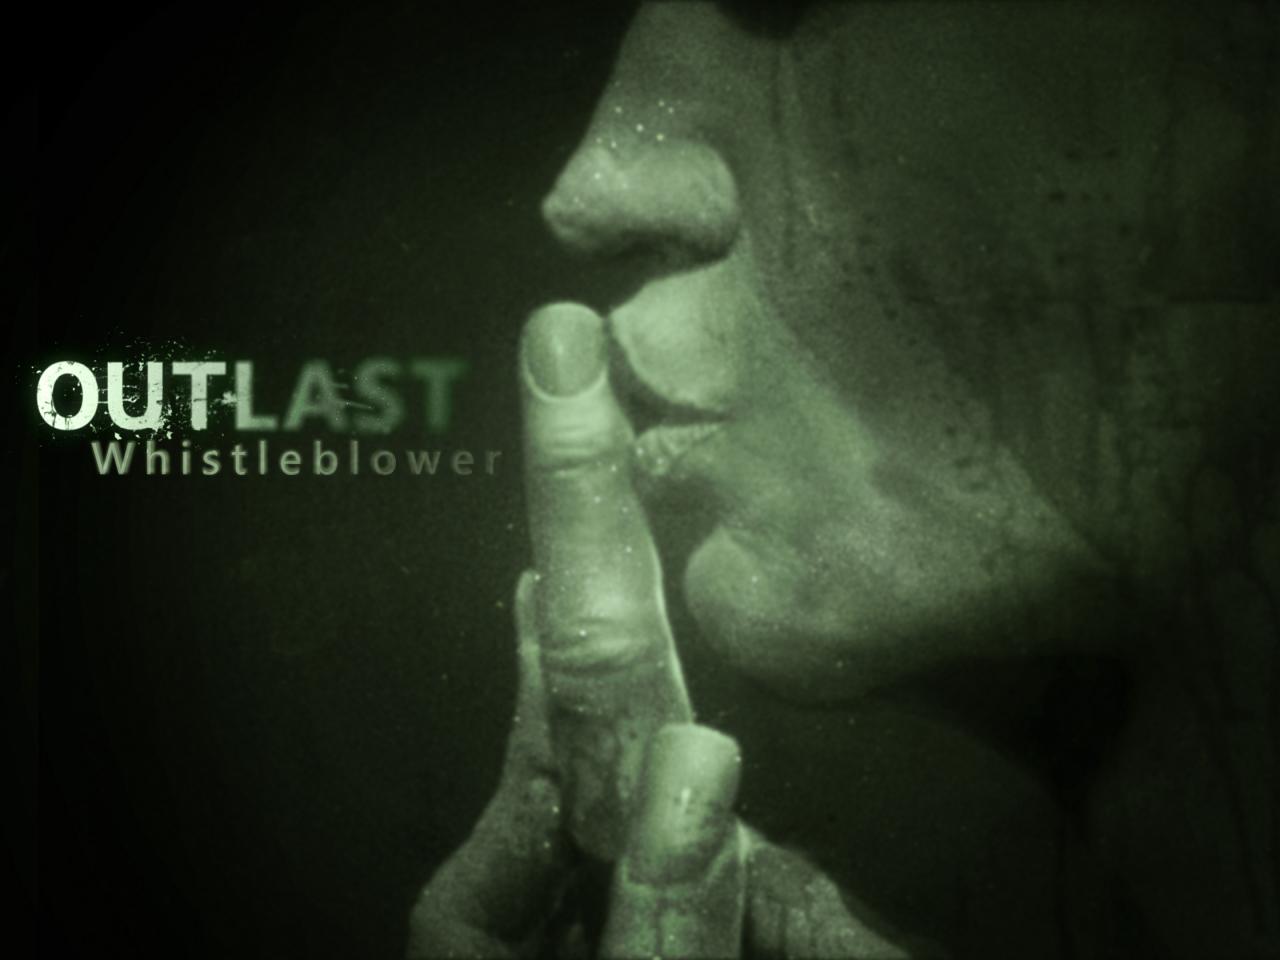 download outlast 2 for free